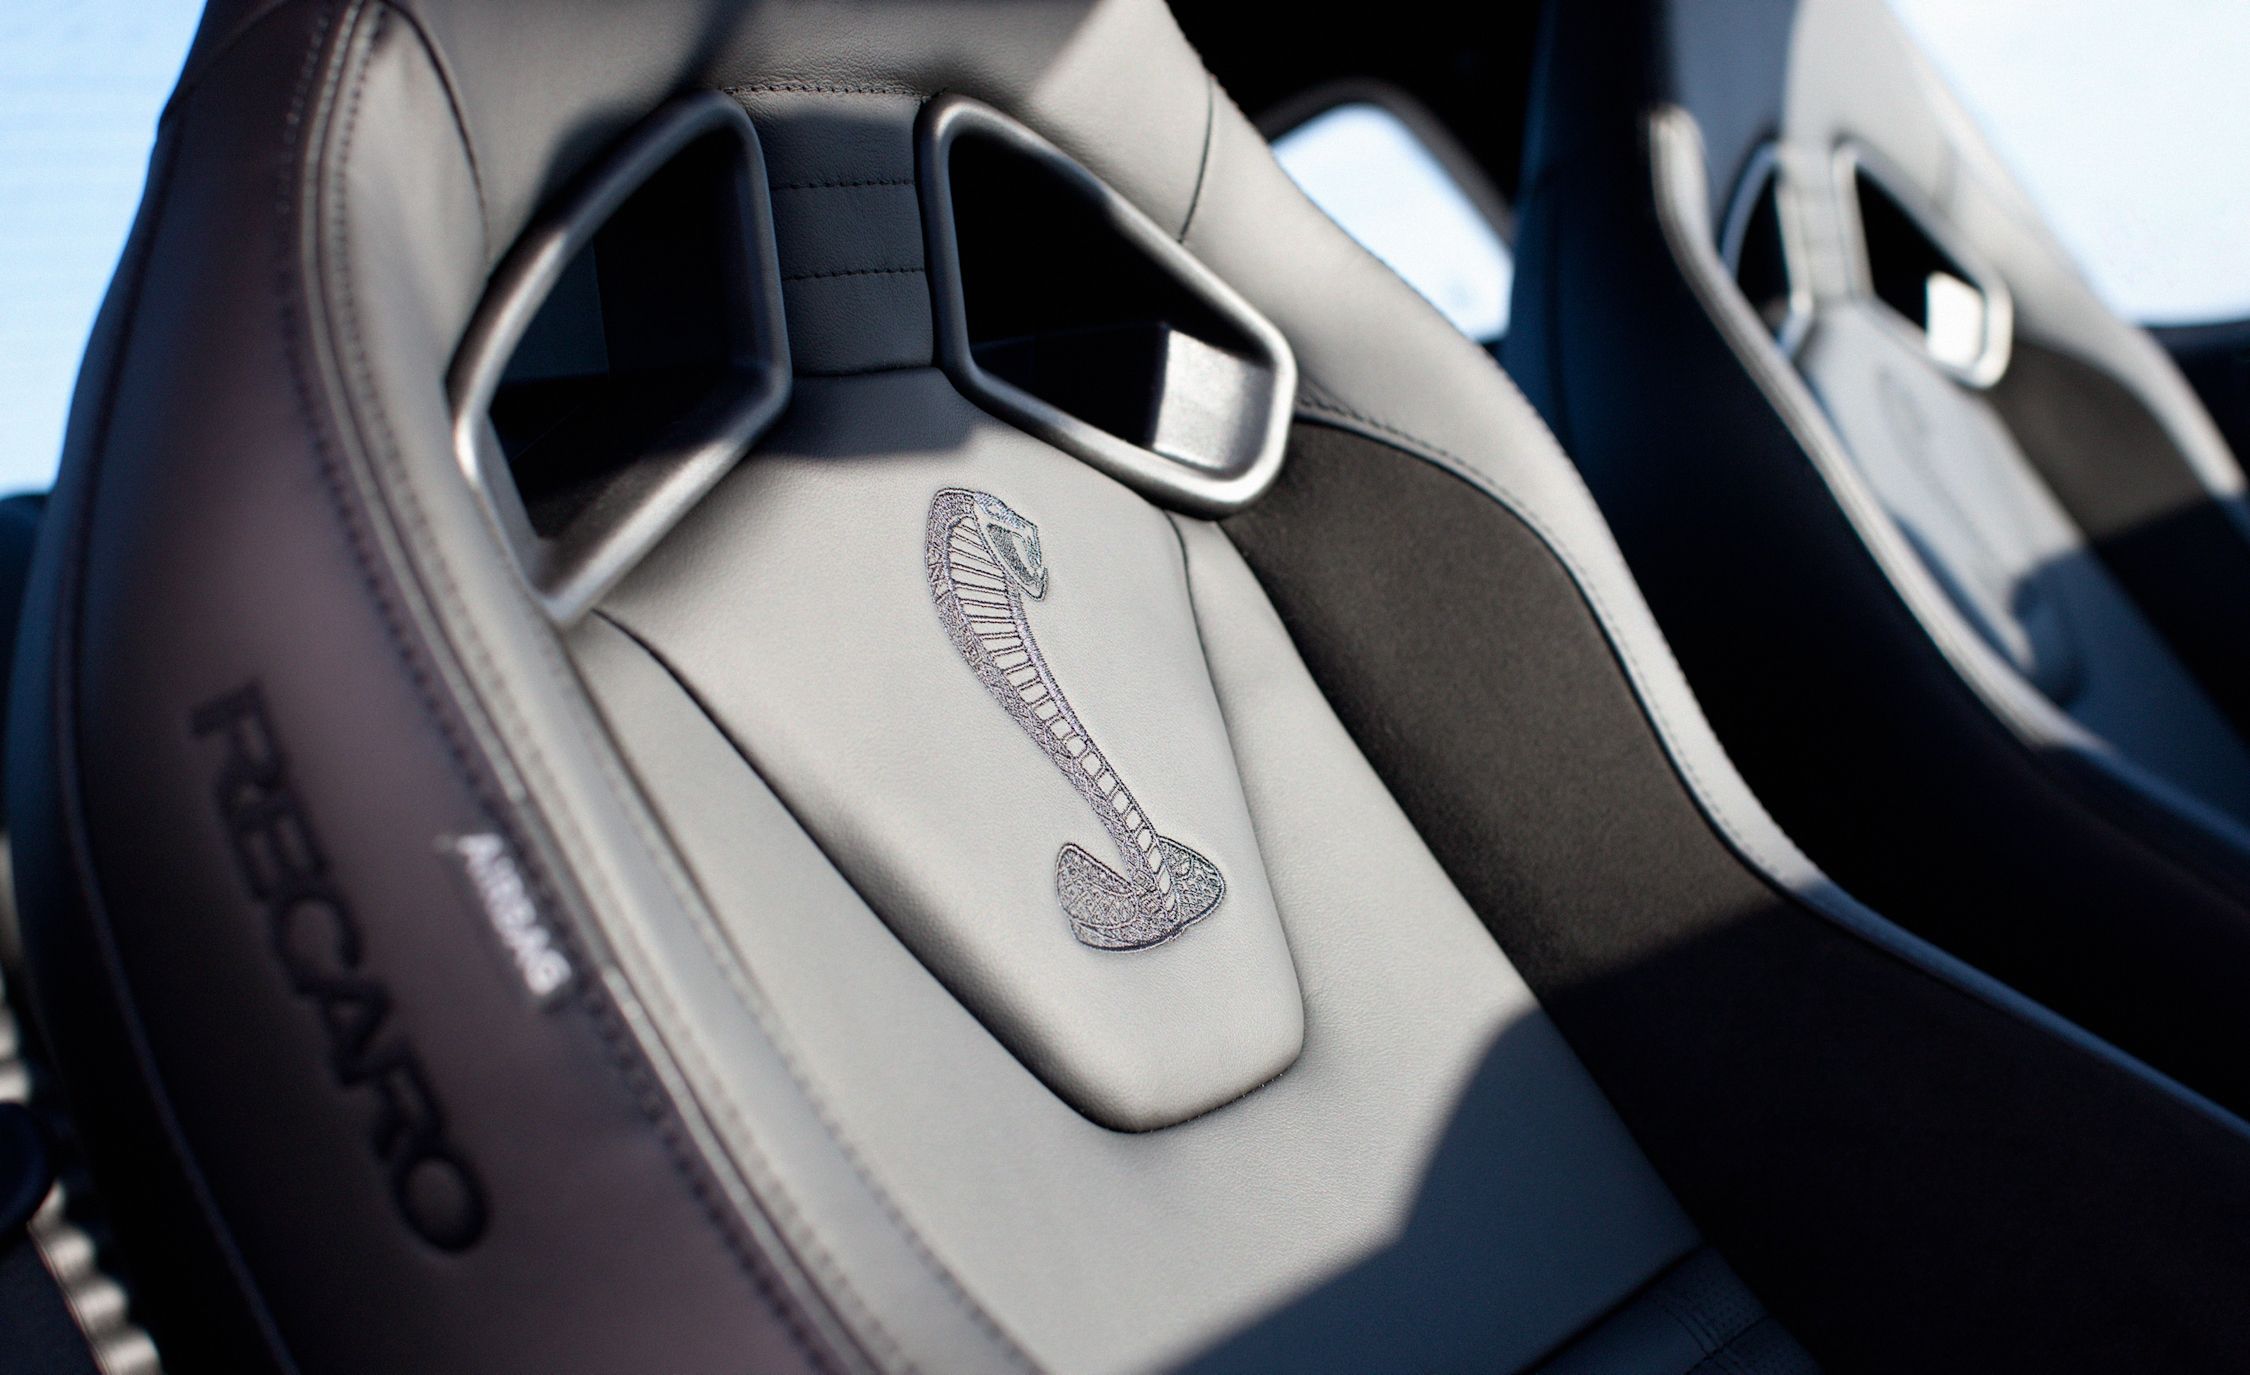 2013 Ford Mustang Shelby Gt500 Interior Seats Leather Details (View 29 of 47)